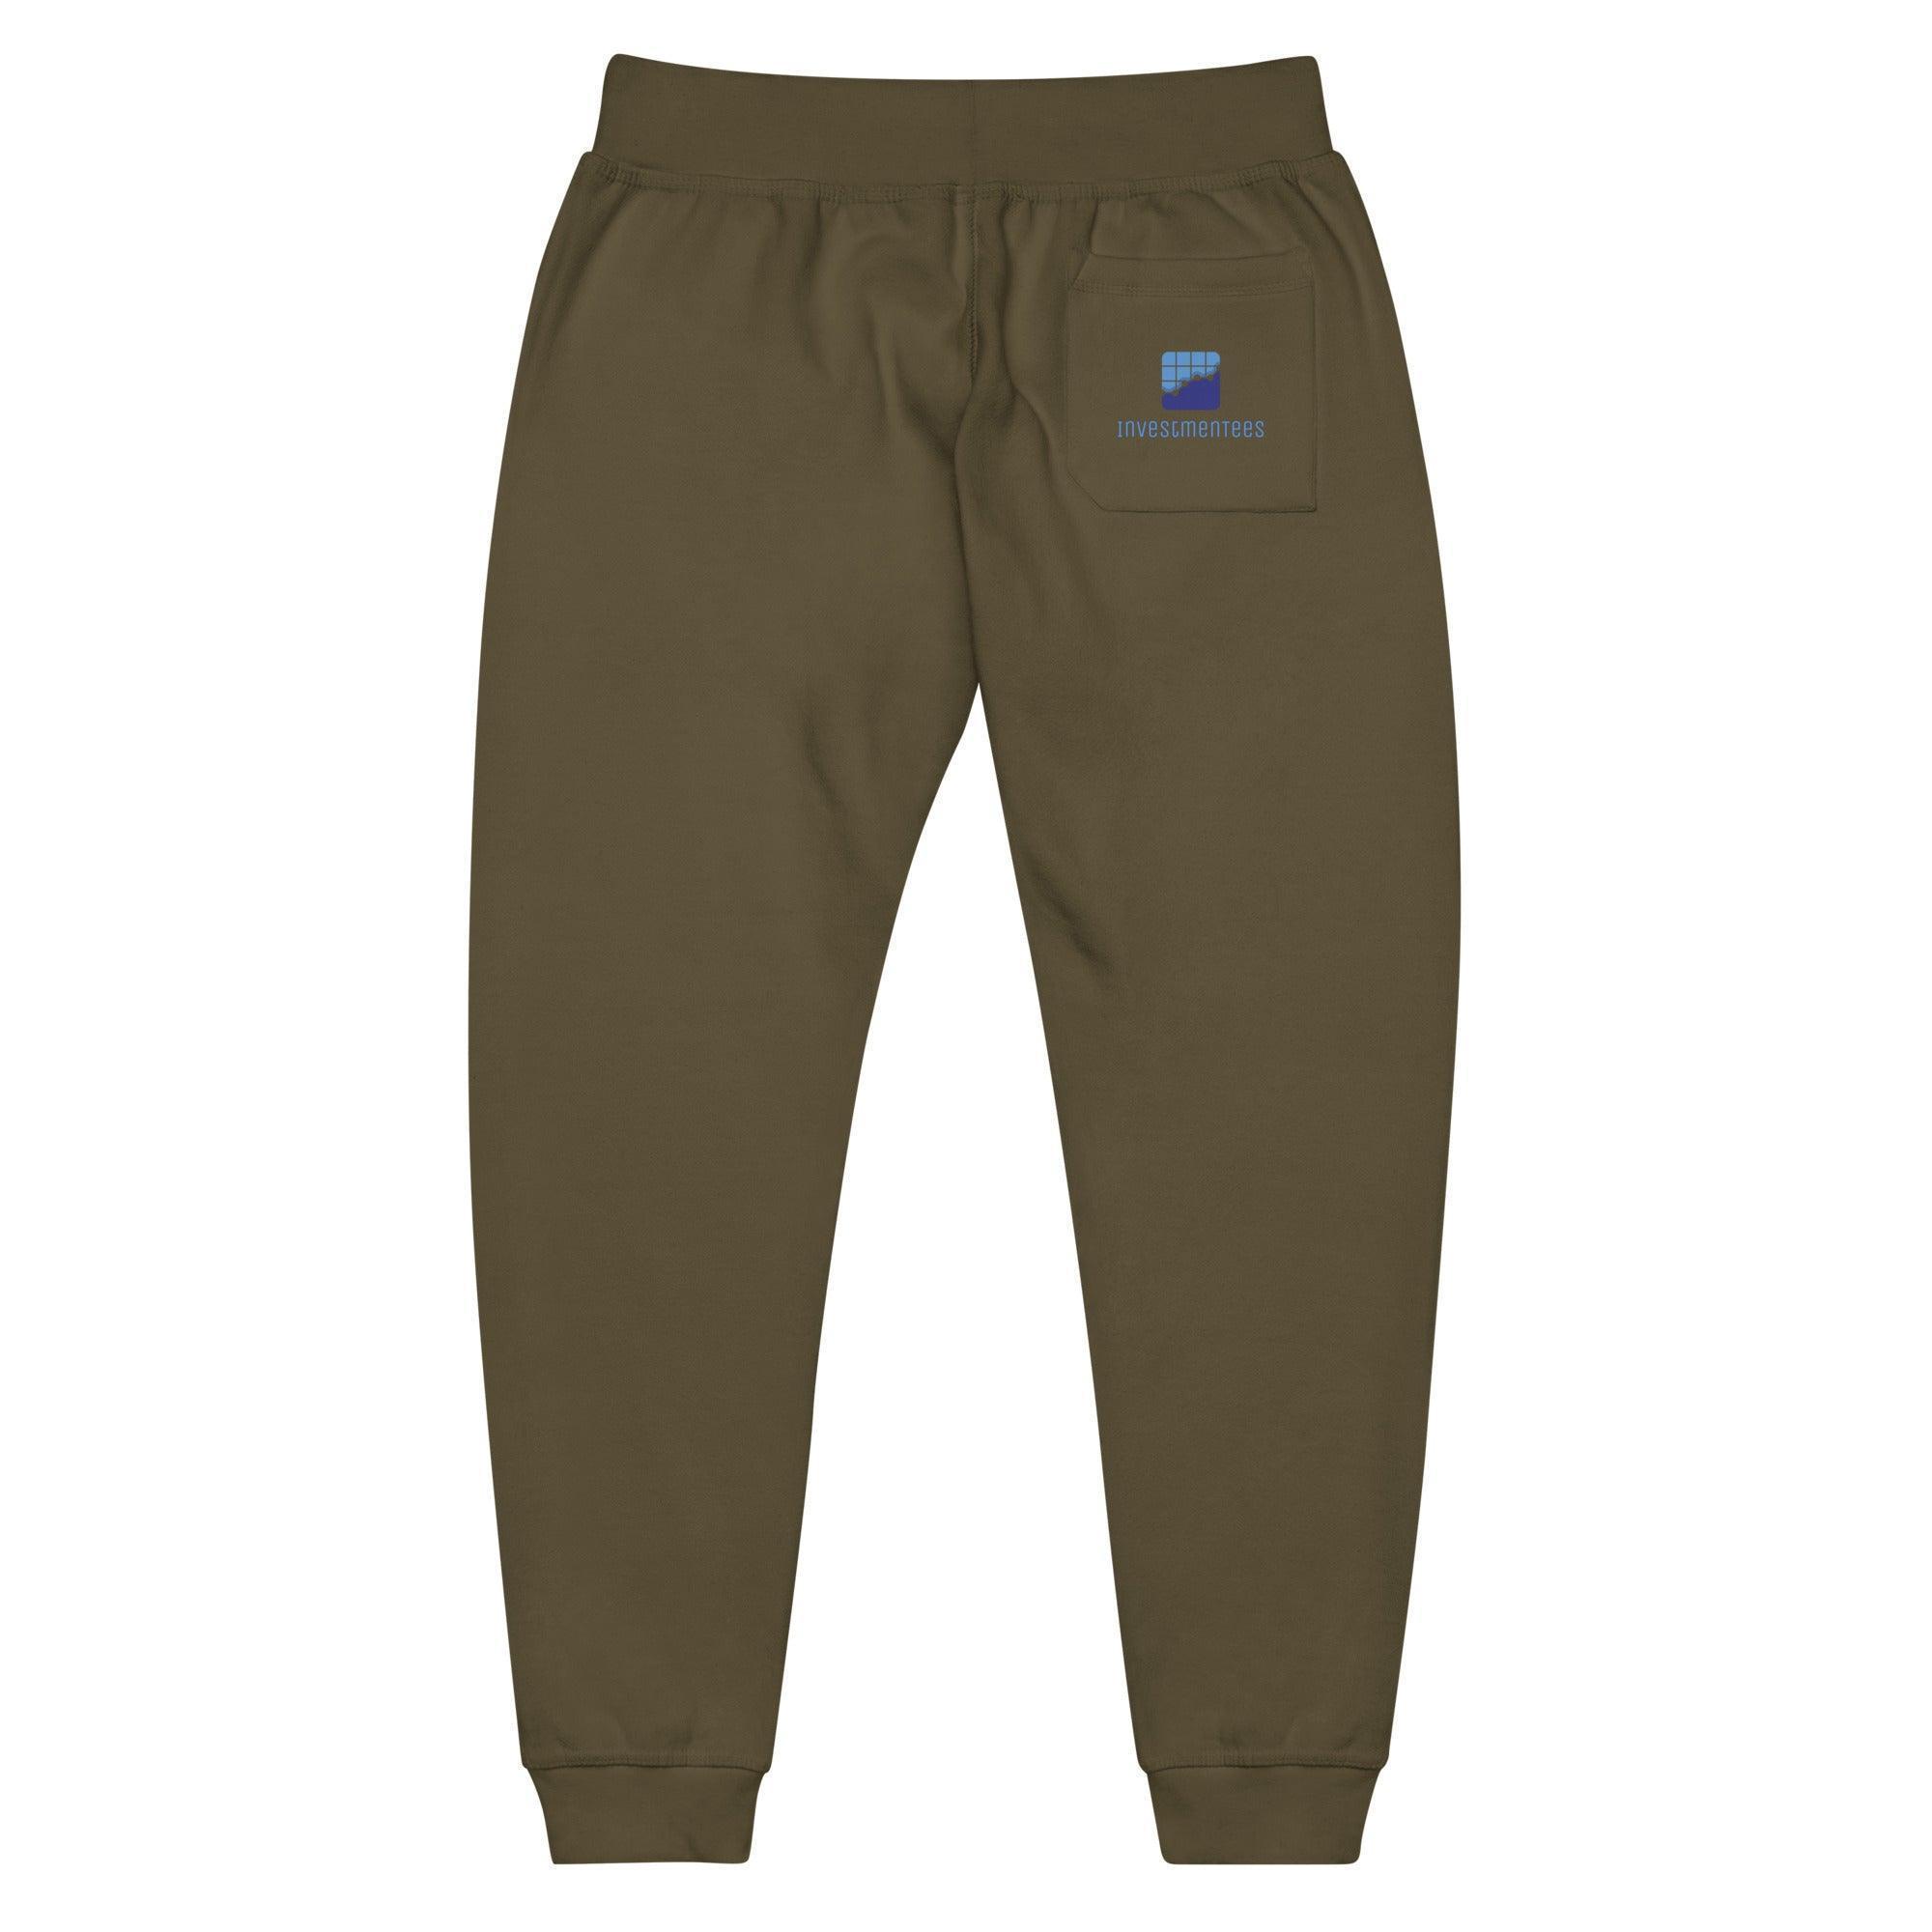 Day Trader Sweatpants - InvestmenTees